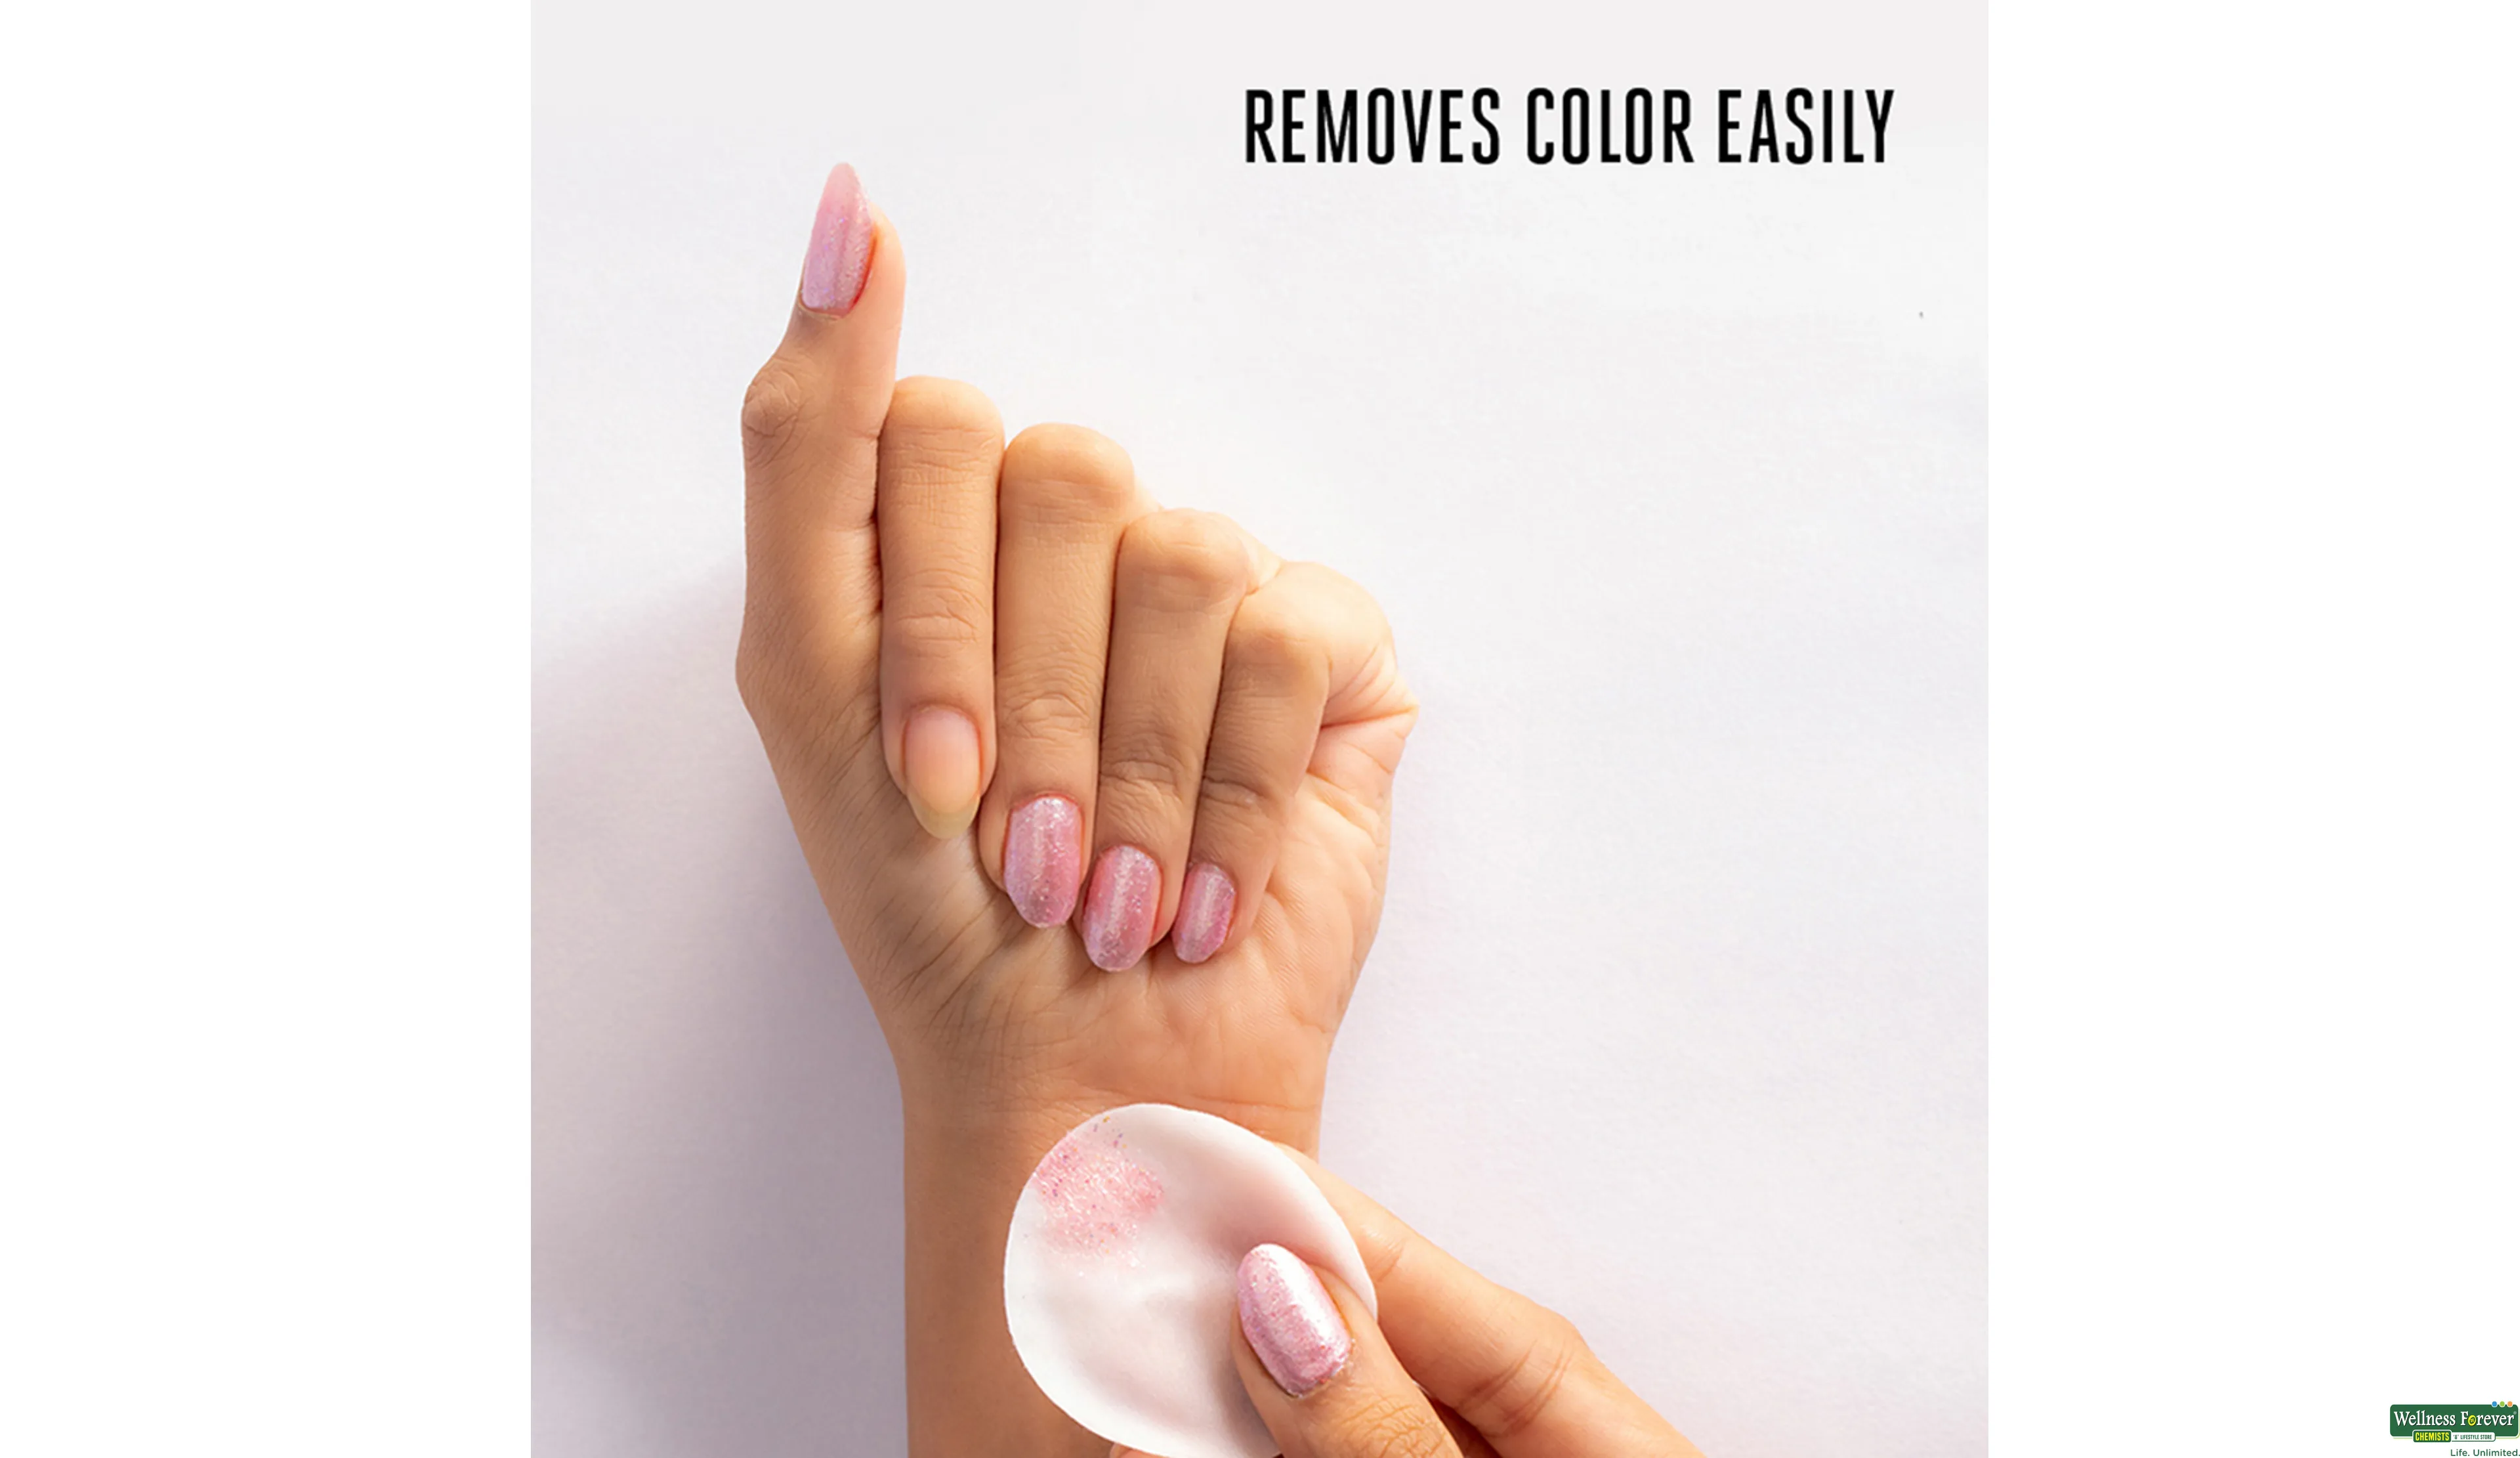 Buy Lakmé Nail Color Remover, 27ml & Lakmé 9 to 5 Primer + Gloss Nail  Colour, Pink Pace, 6 ml Online at Low Prices in India - Amazon.in